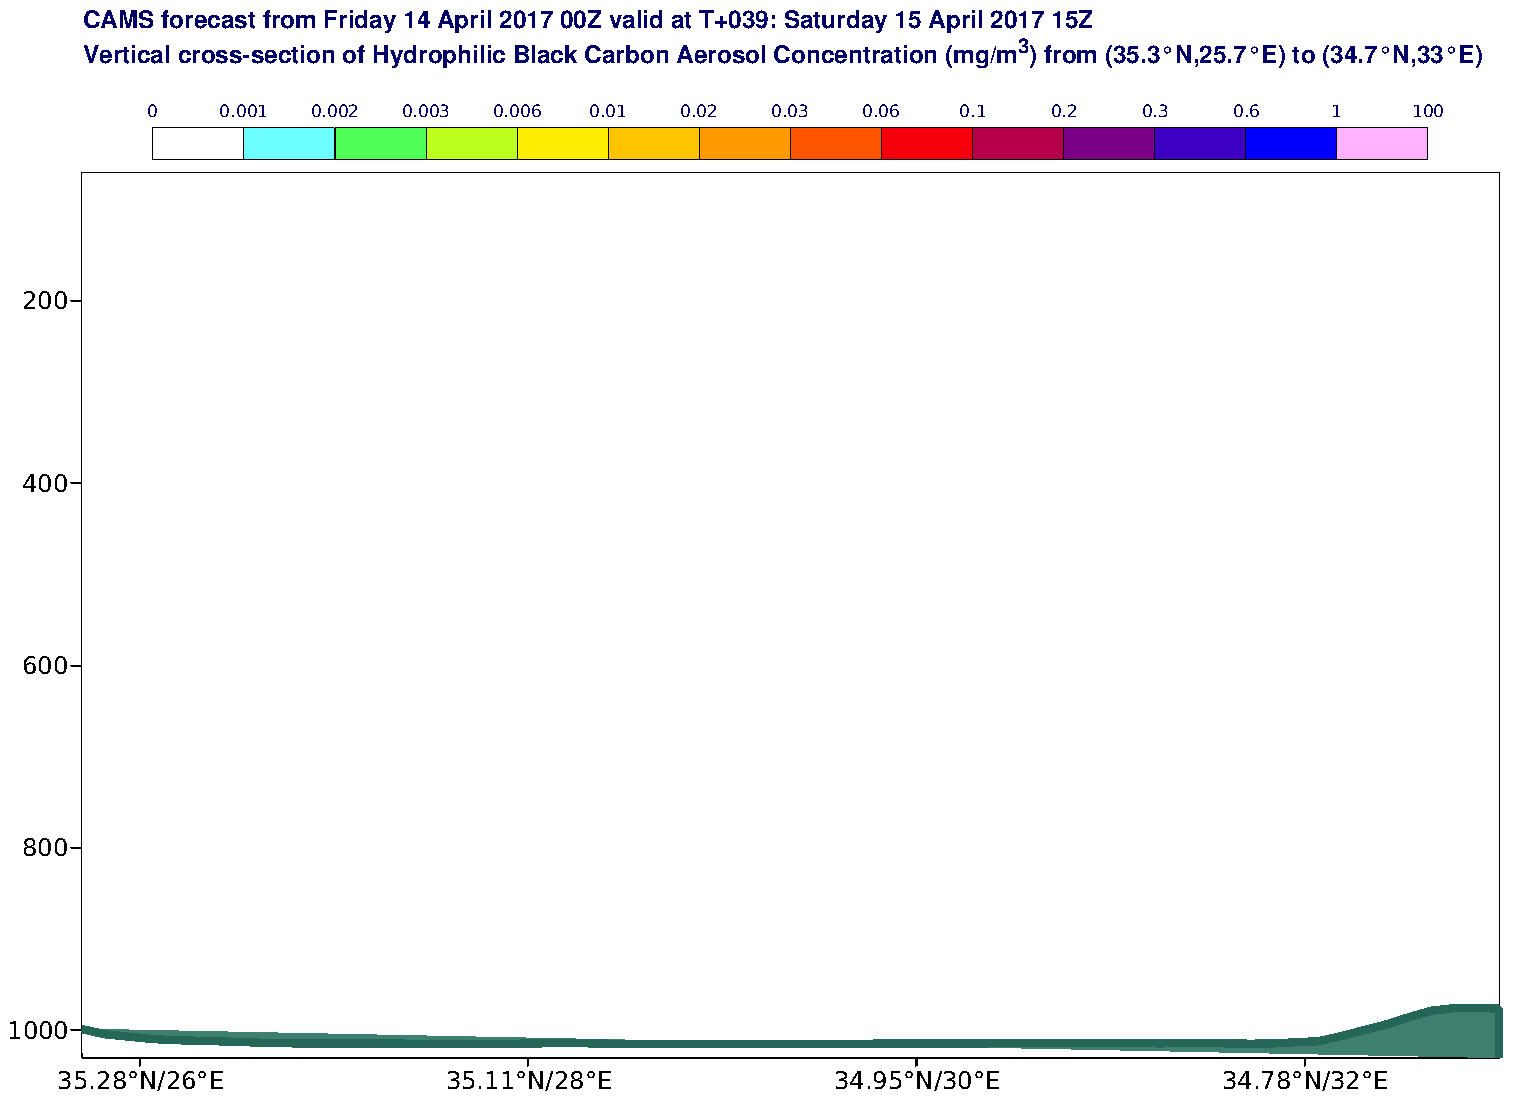 Vertical cross-section of Hydrophilic Black Carbon Aerosol Concentration (mg/m3) valid at T39 - 2017-04-15 15:00